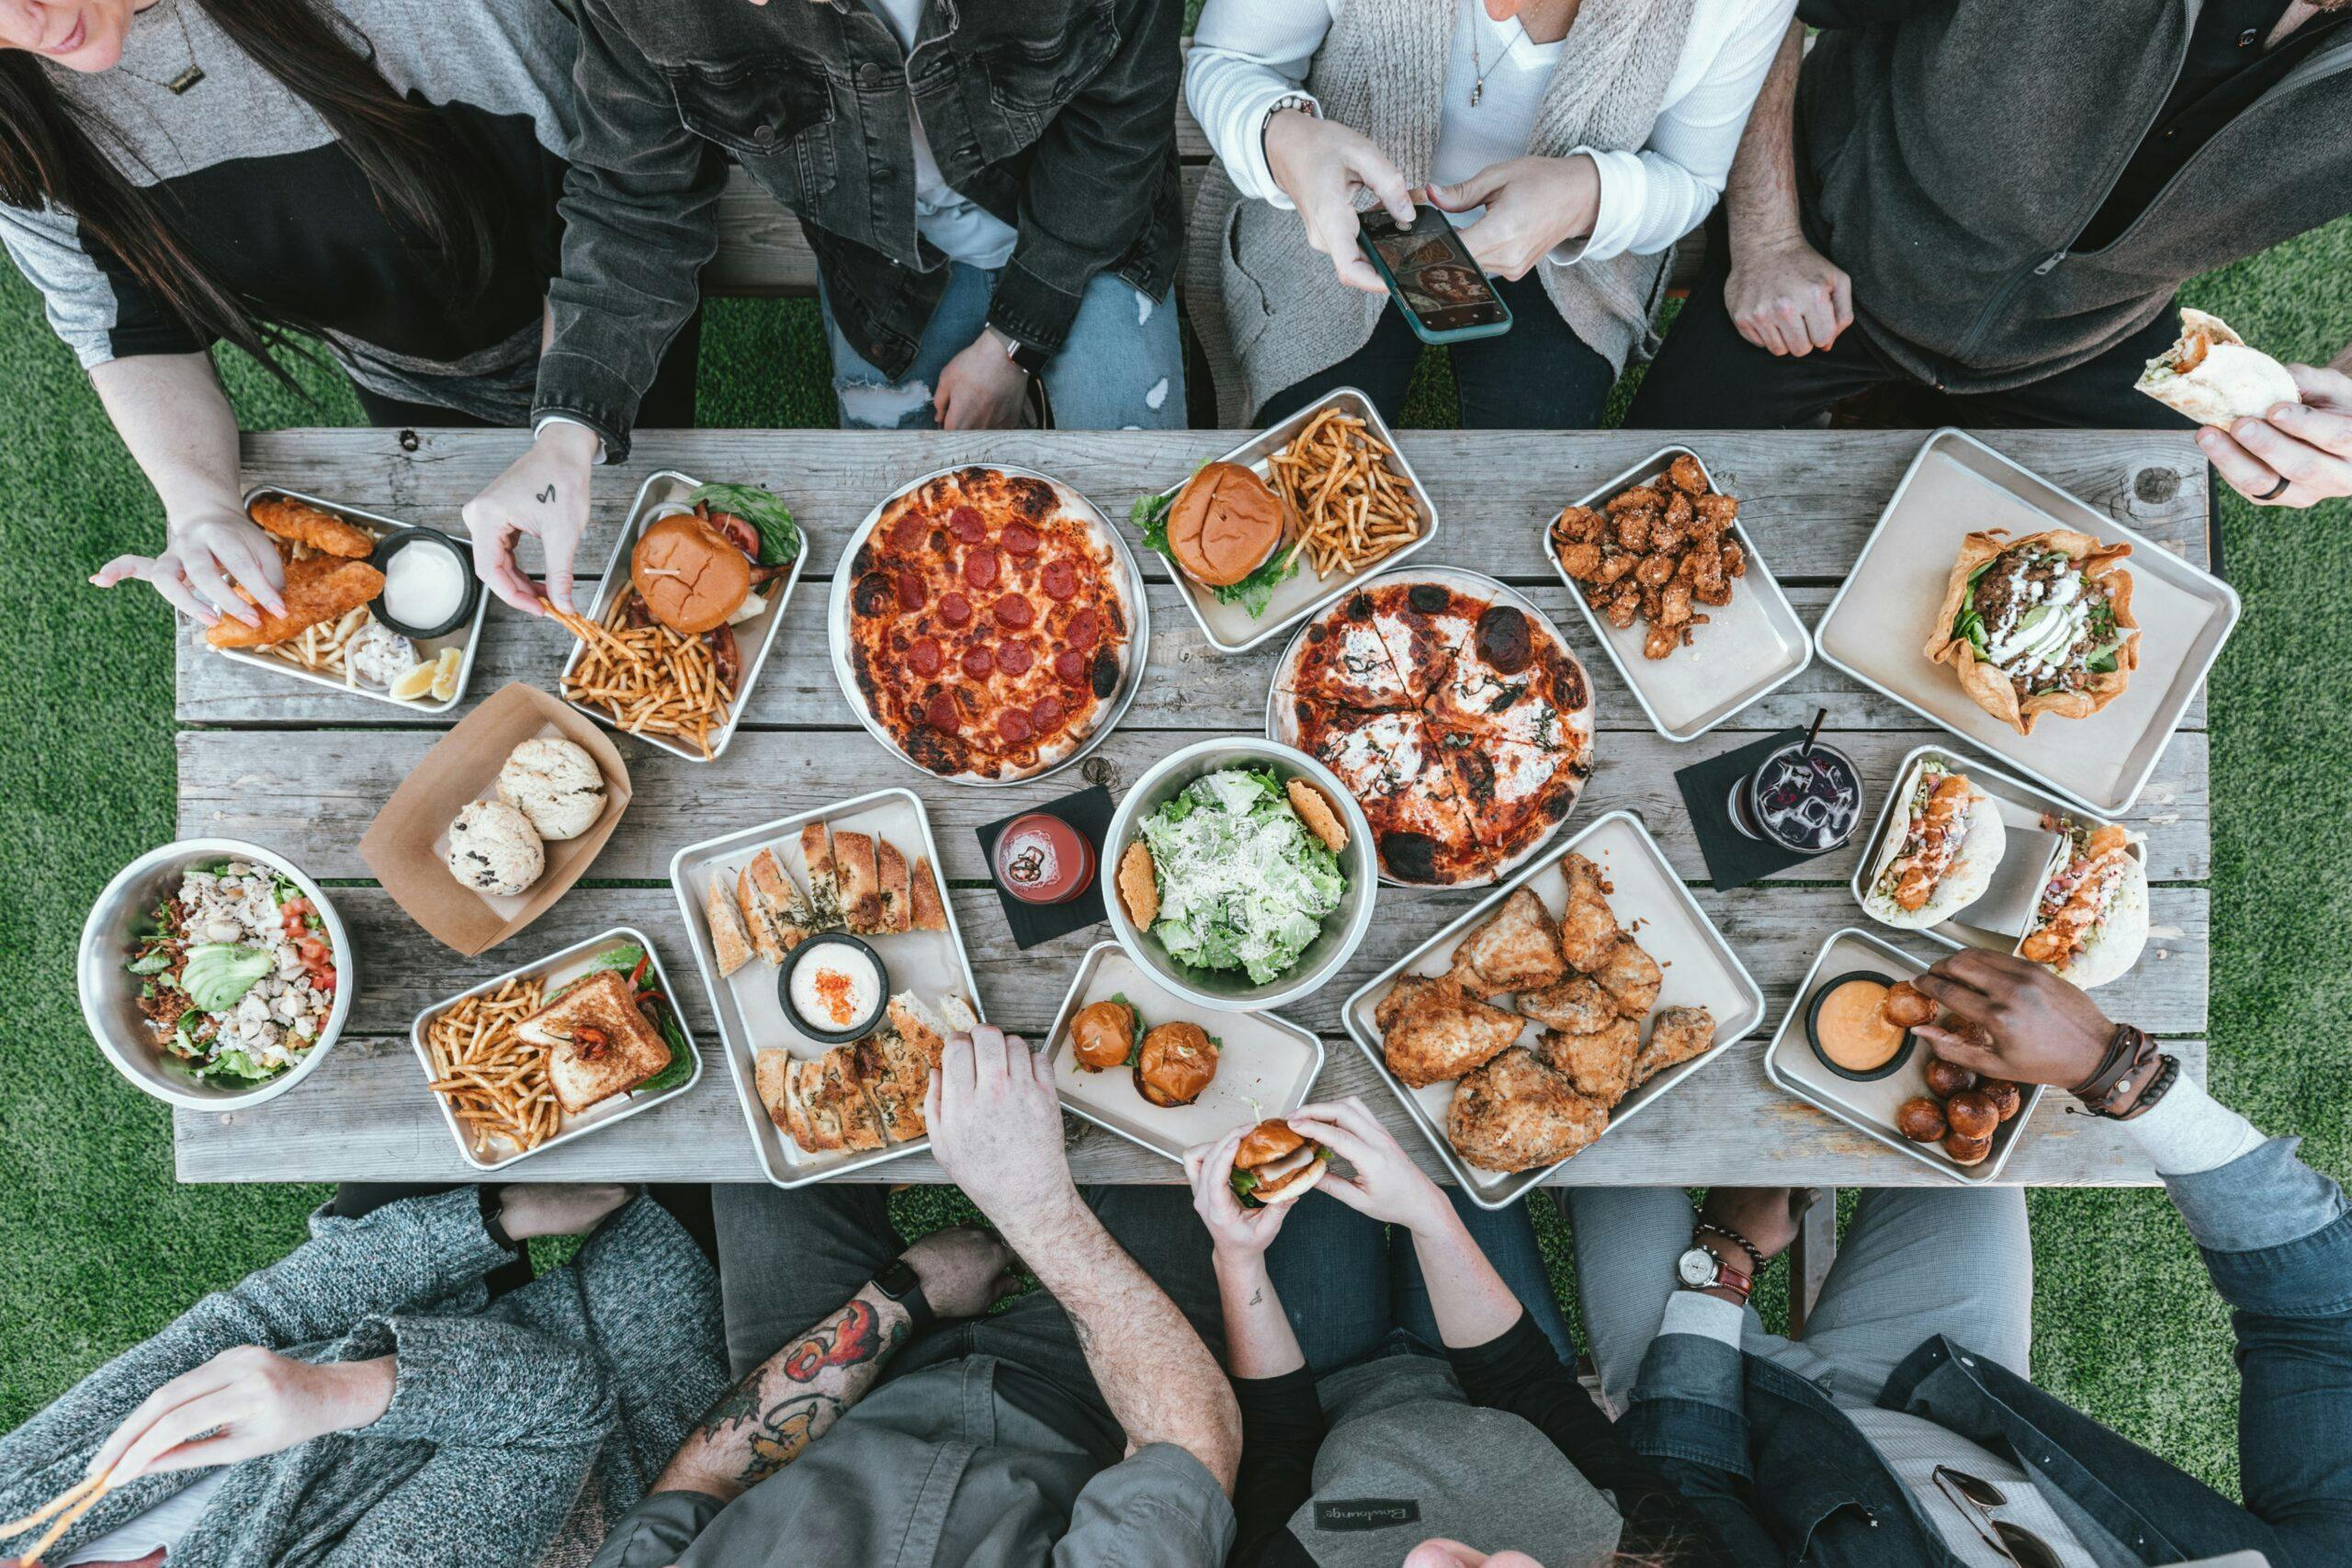 An aerial shot of eight people sat around a table eating pizza, fried chicken, and burgers.